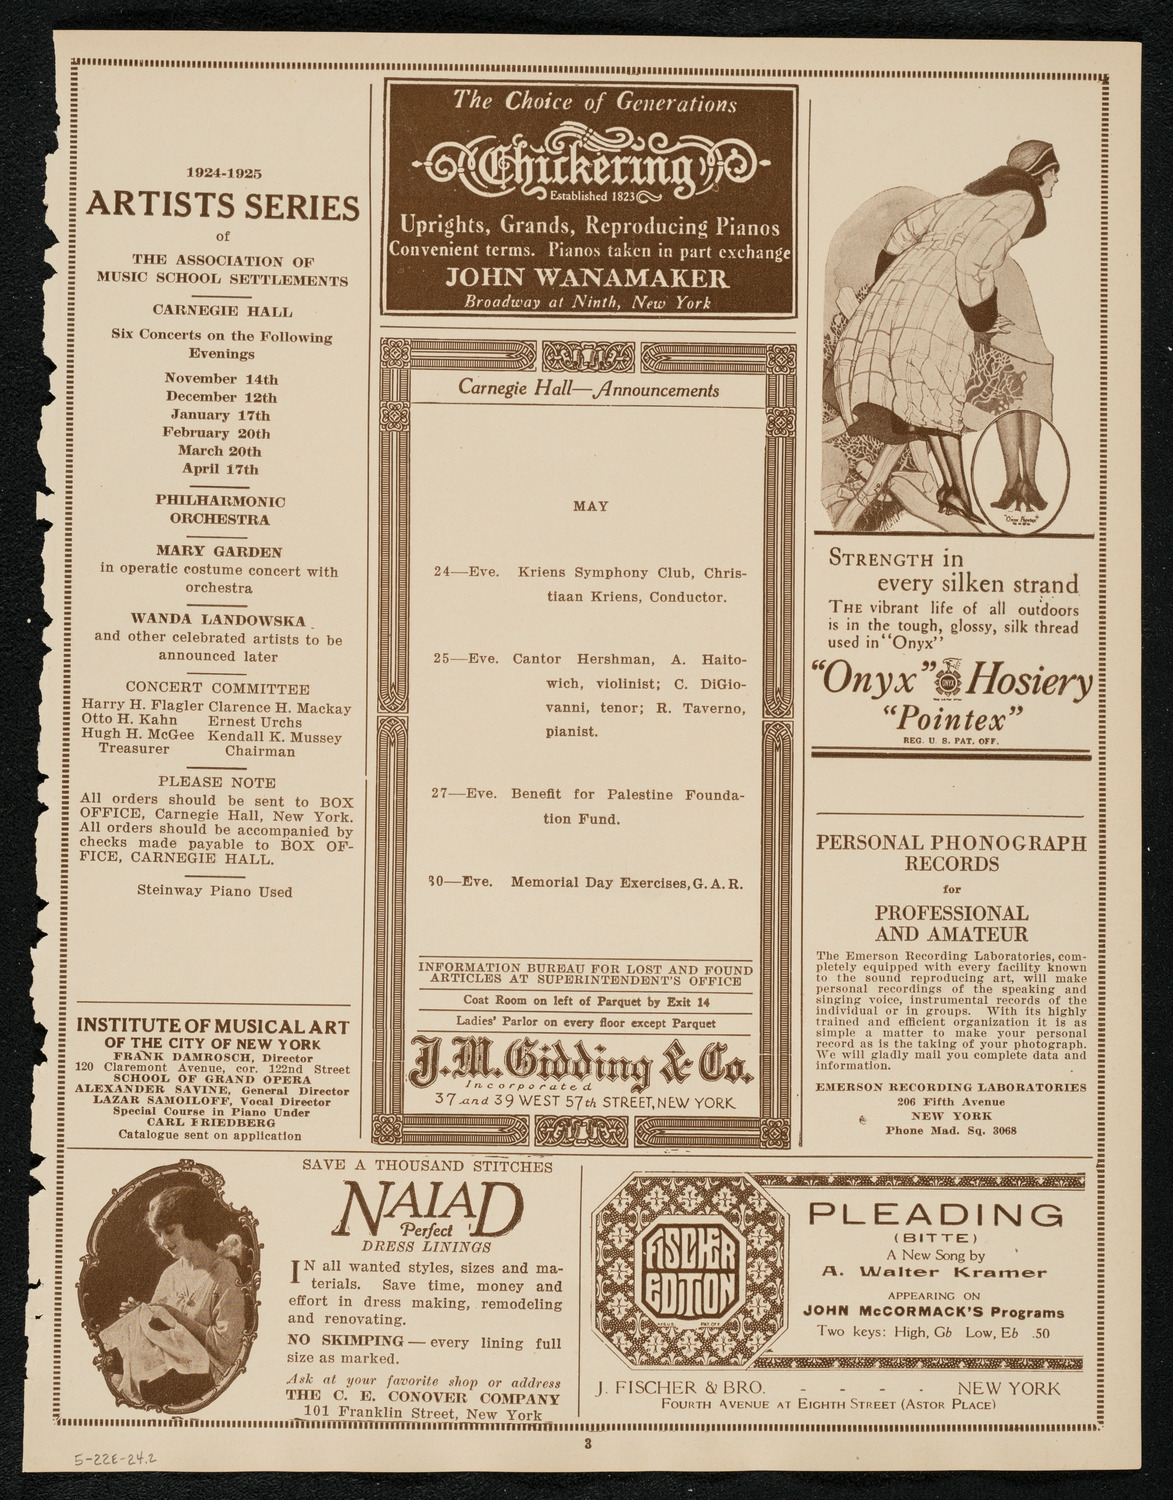 Graduation: College of Pharmacy of the City of New York Columbia University, May 22, 1924, program page 3